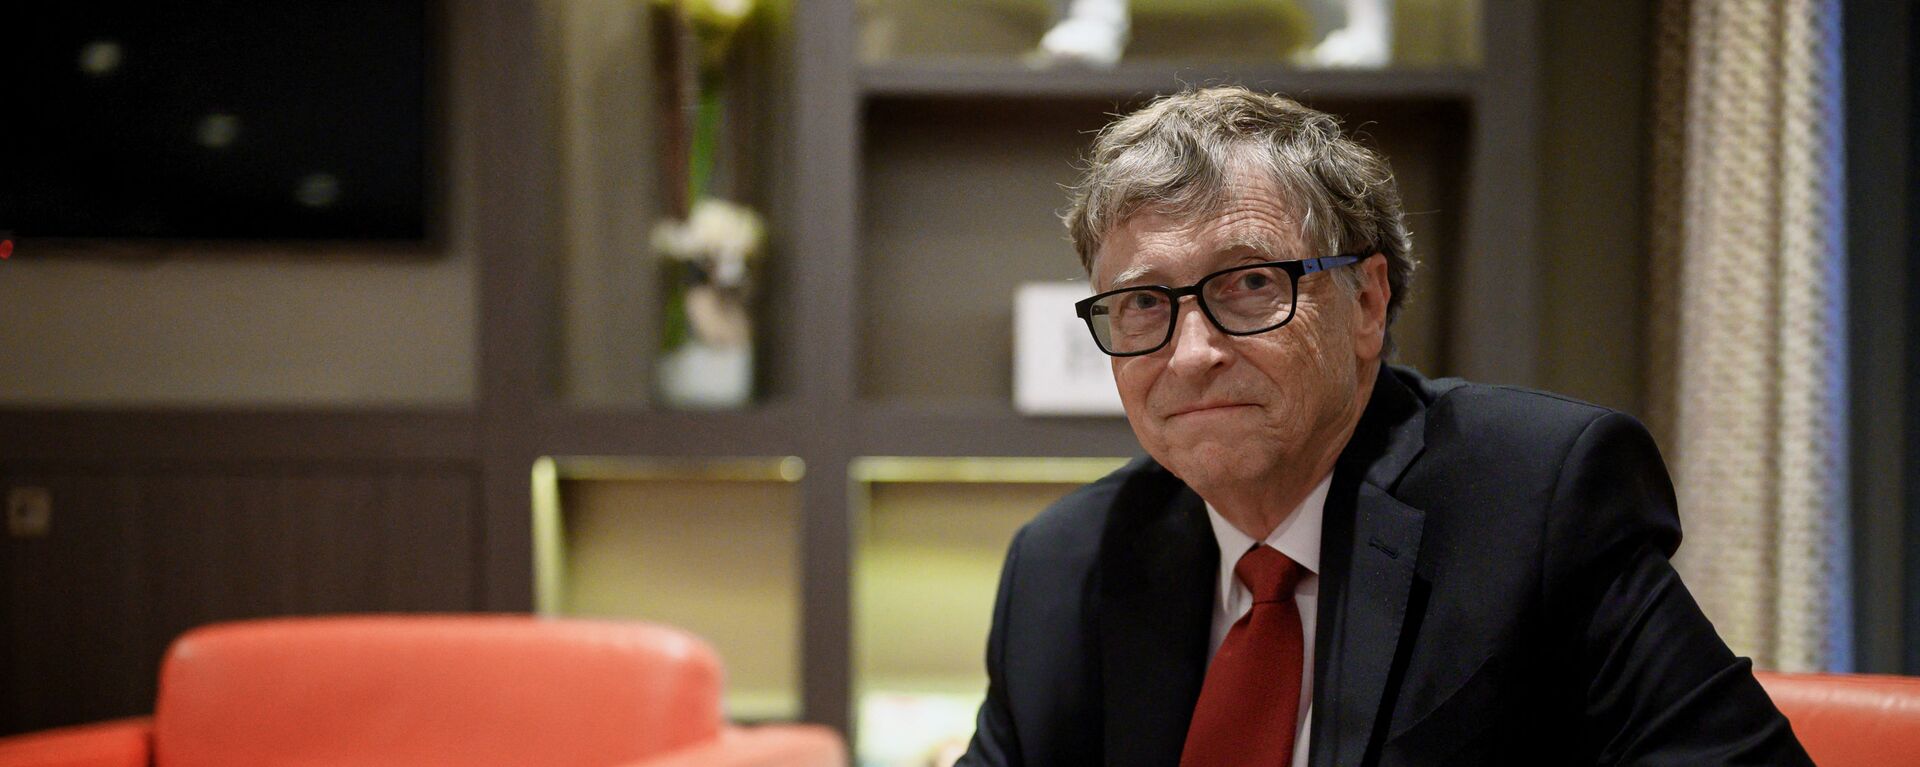 US Microsoft founder, Co-Chairman of the Bill & Melinda Gates Foundation, Bill Gates, poses for a picture on October 9, 2019, in Lyon, central eastern France, during the funding conference of Global Fund to Fight AIDS, Tuberculosis and Malaria.  - Sputnik International, 1920, 17.10.2022